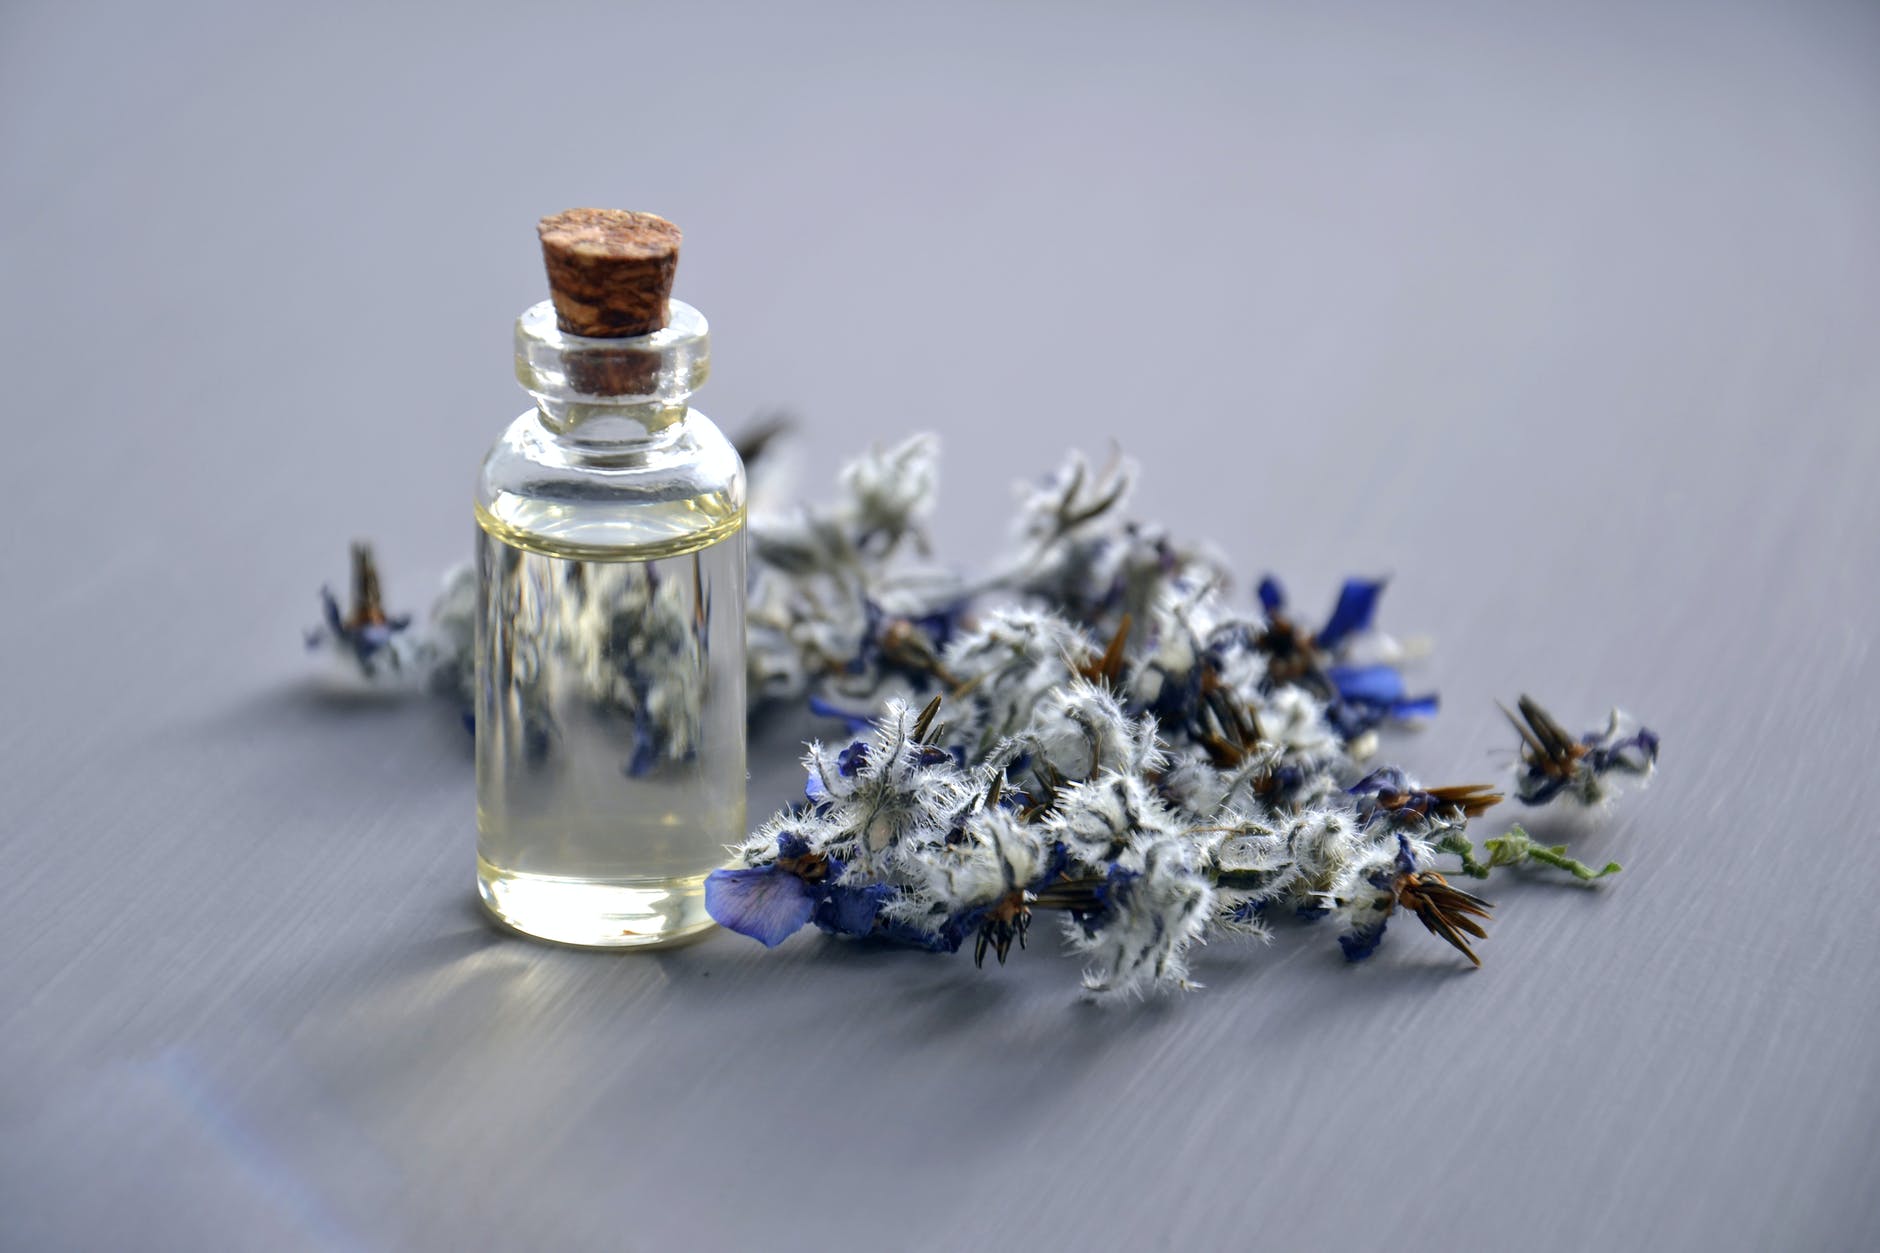 Aromatherapy Massage - selective focus photo of bottle with cork lid